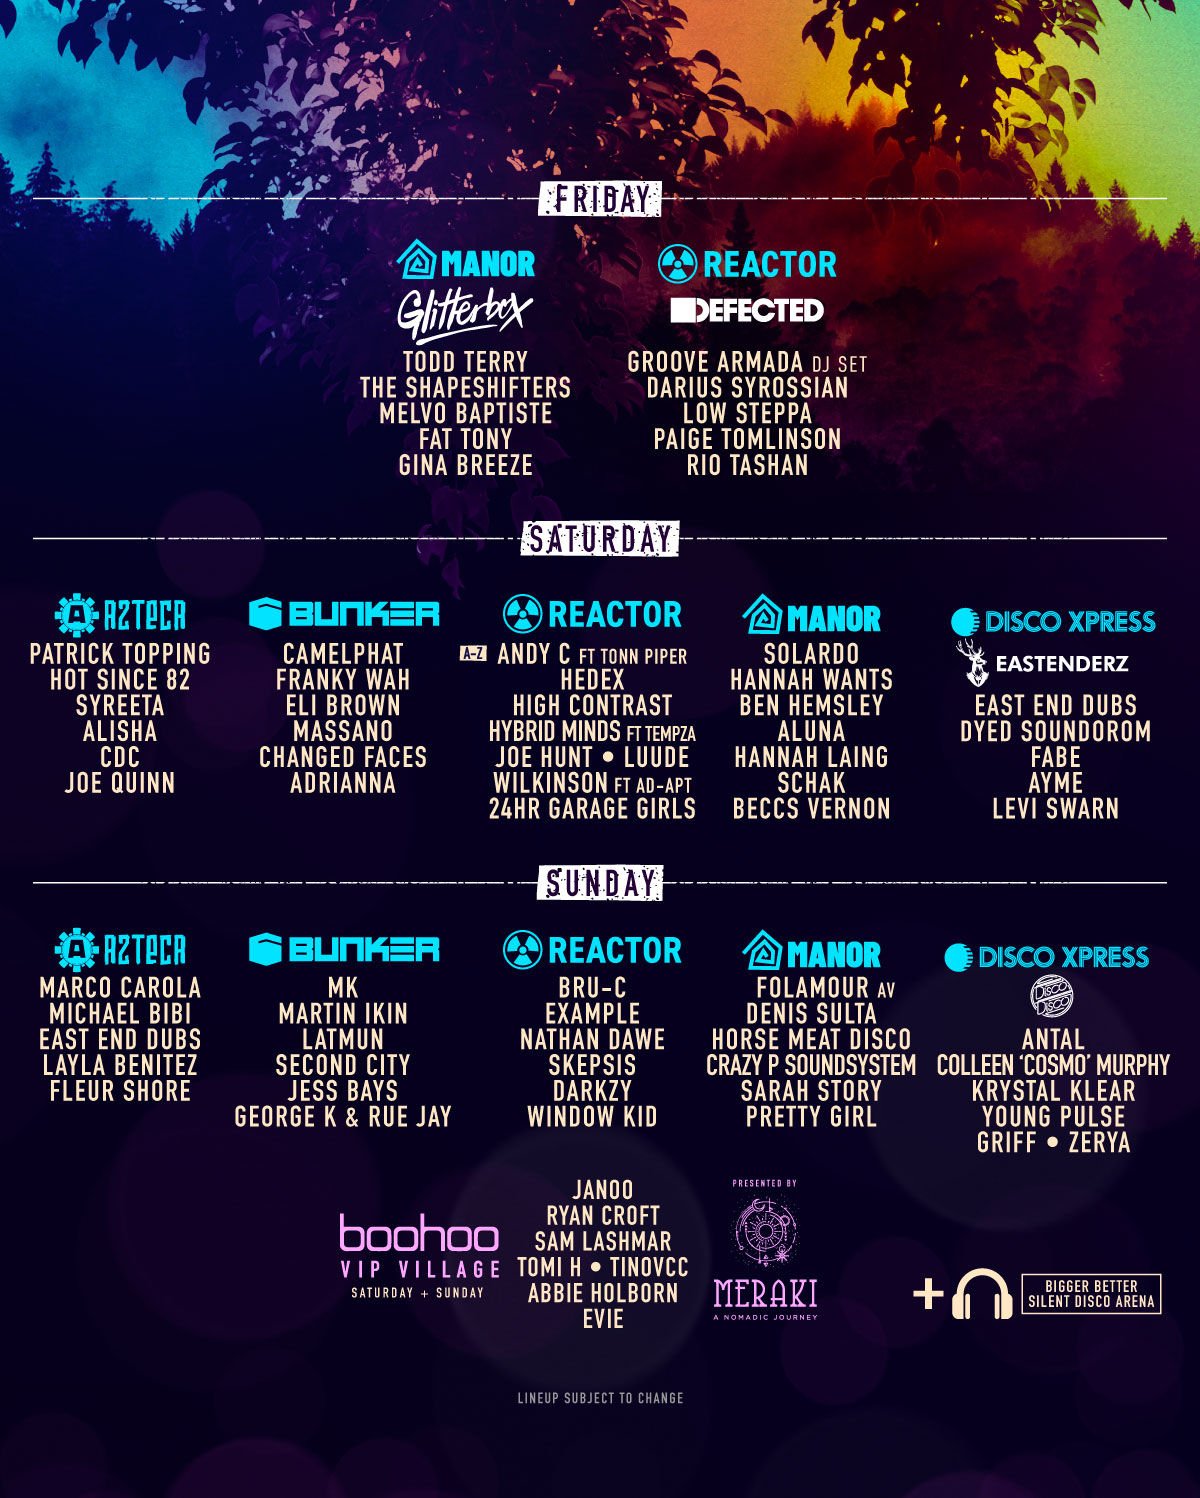 Forbidden Forest Festival announces more acts for 2023